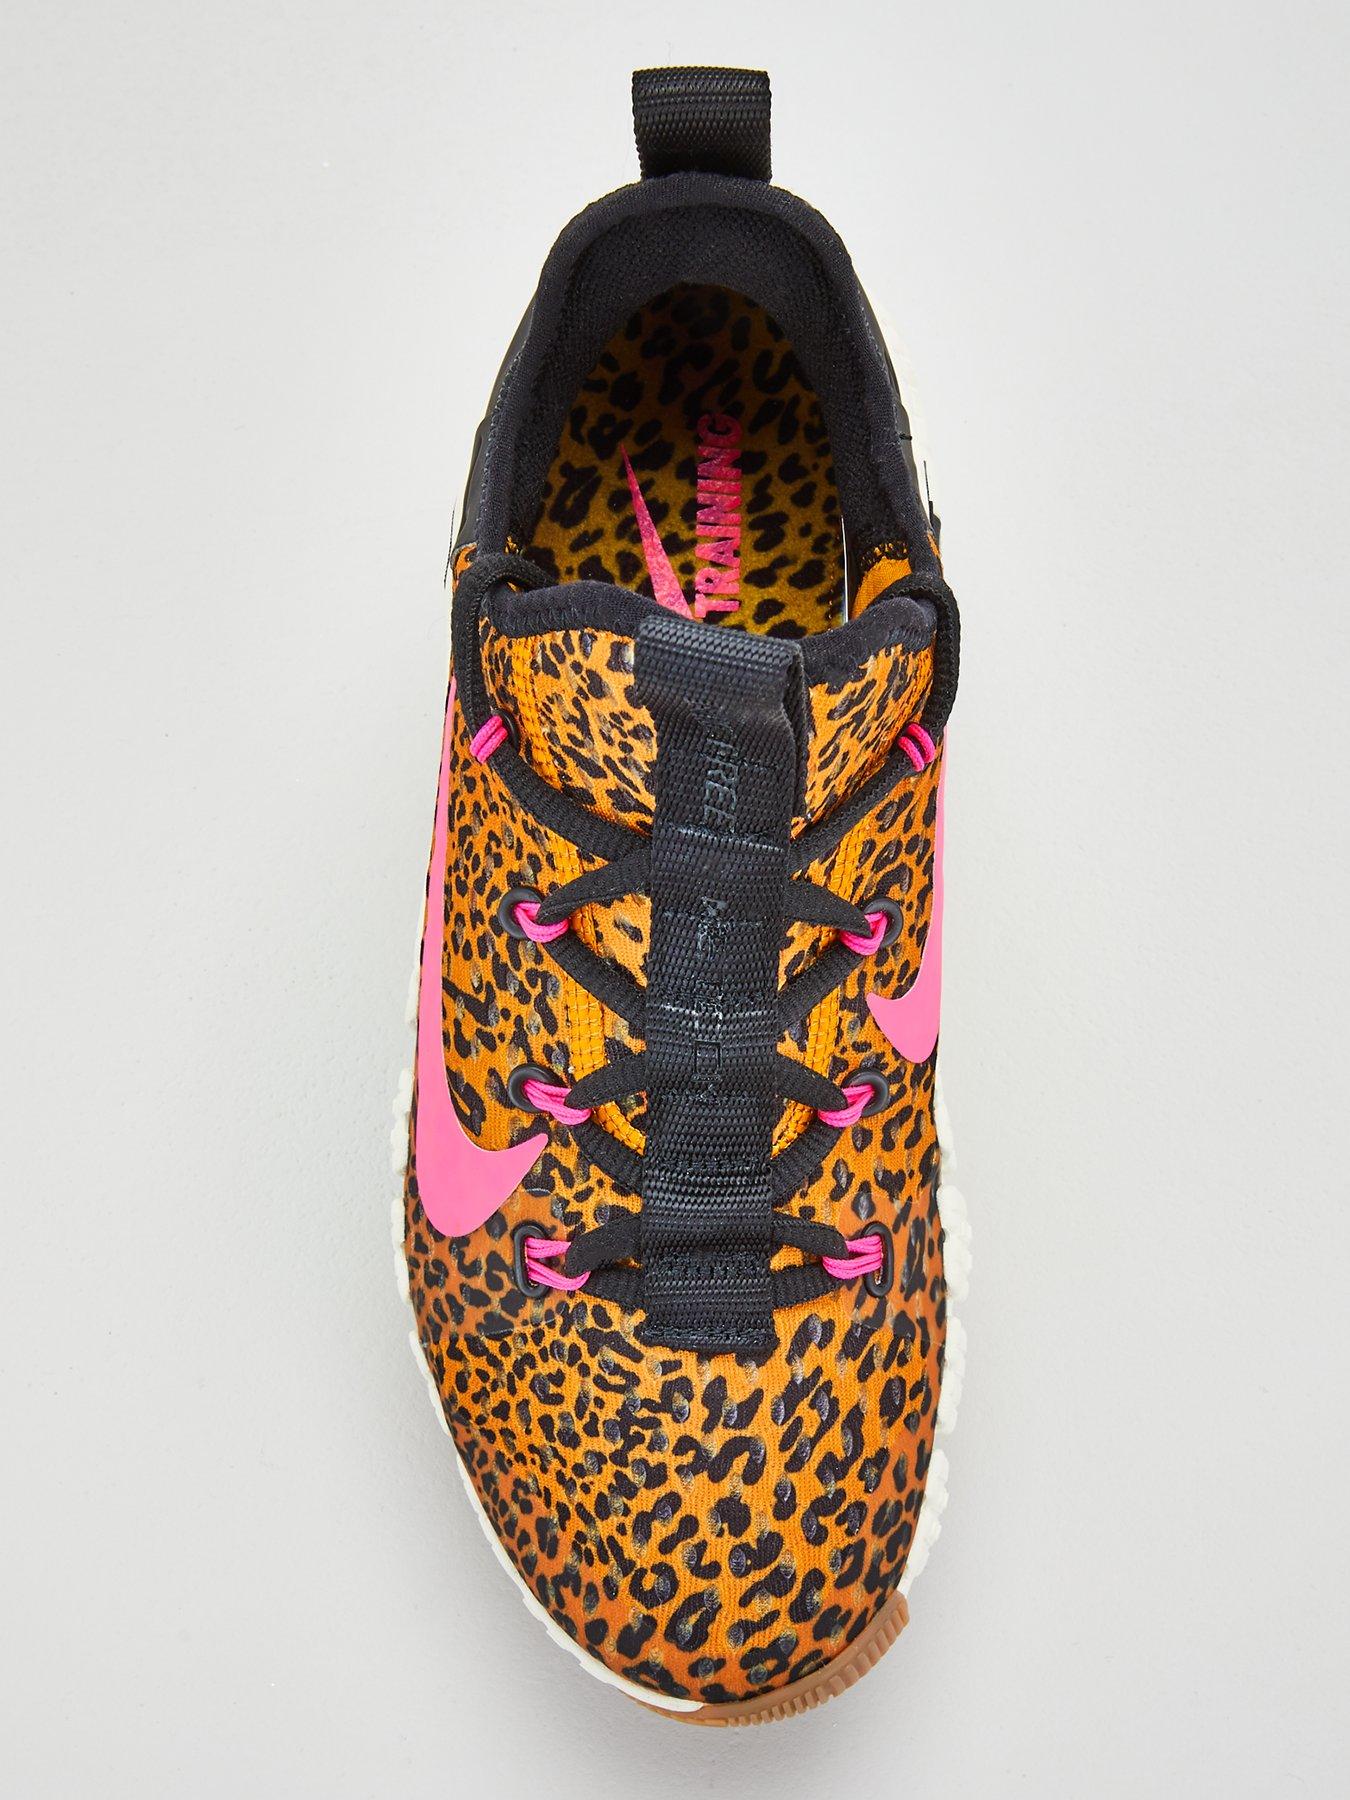 nike training free metcon 3 trainers in leopard print